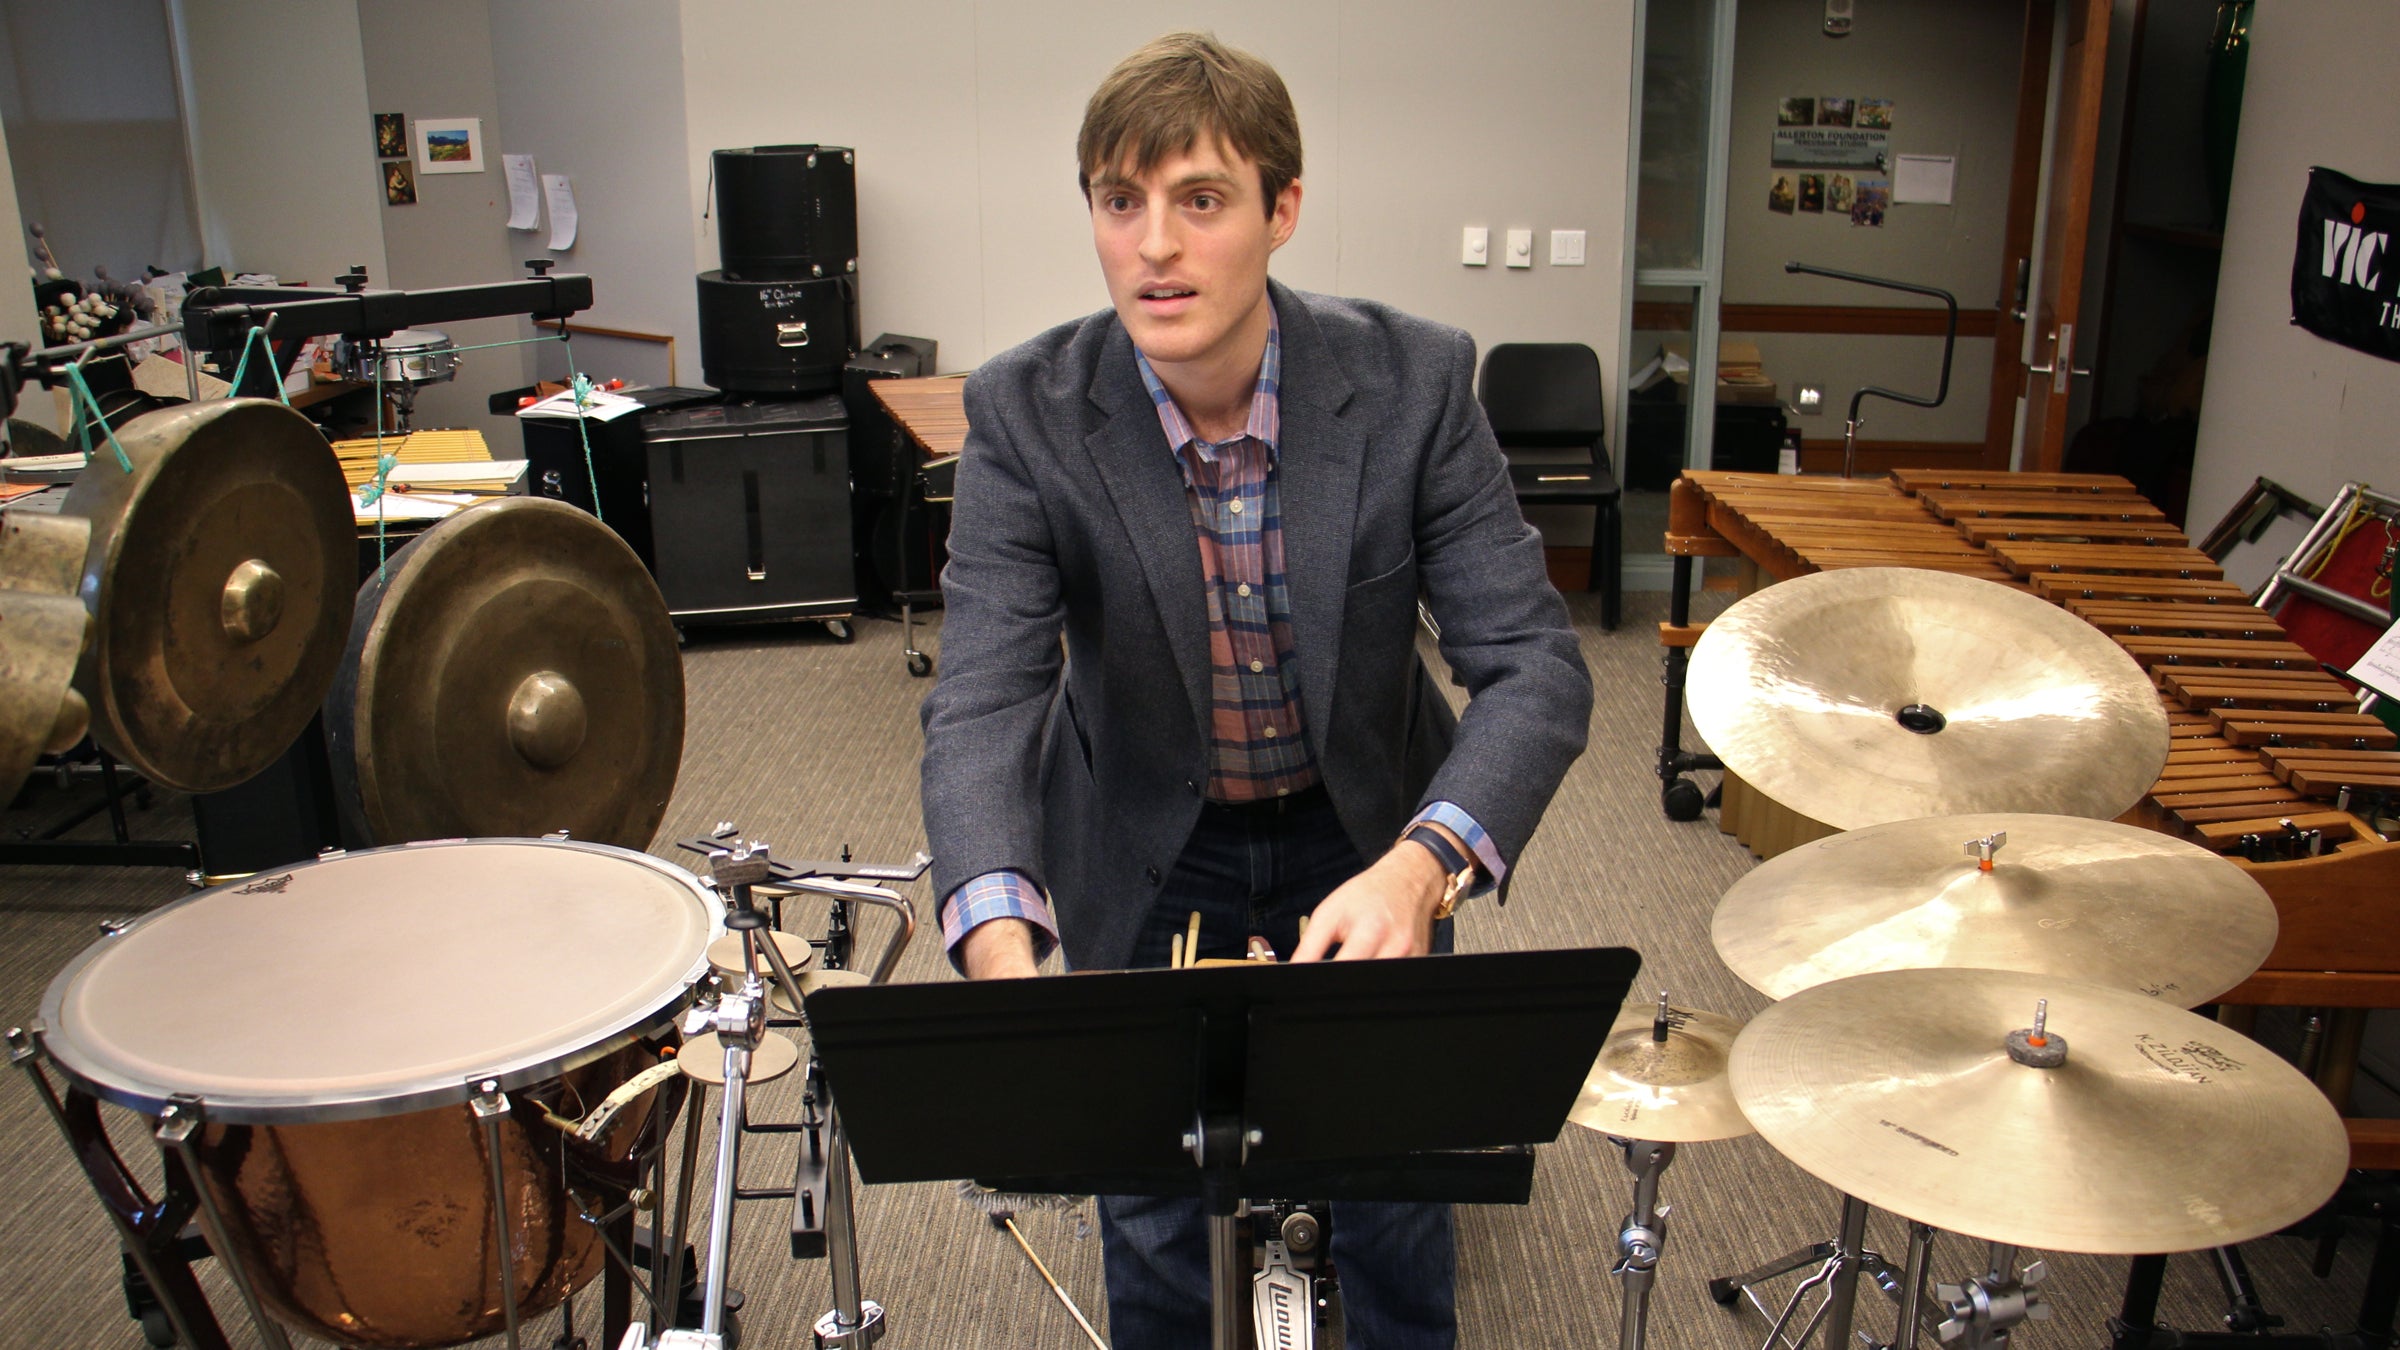 Curtis Institute of Music student Nick DiBerardino composed a work for percussion instruments inspired by Philadelphia's One Book